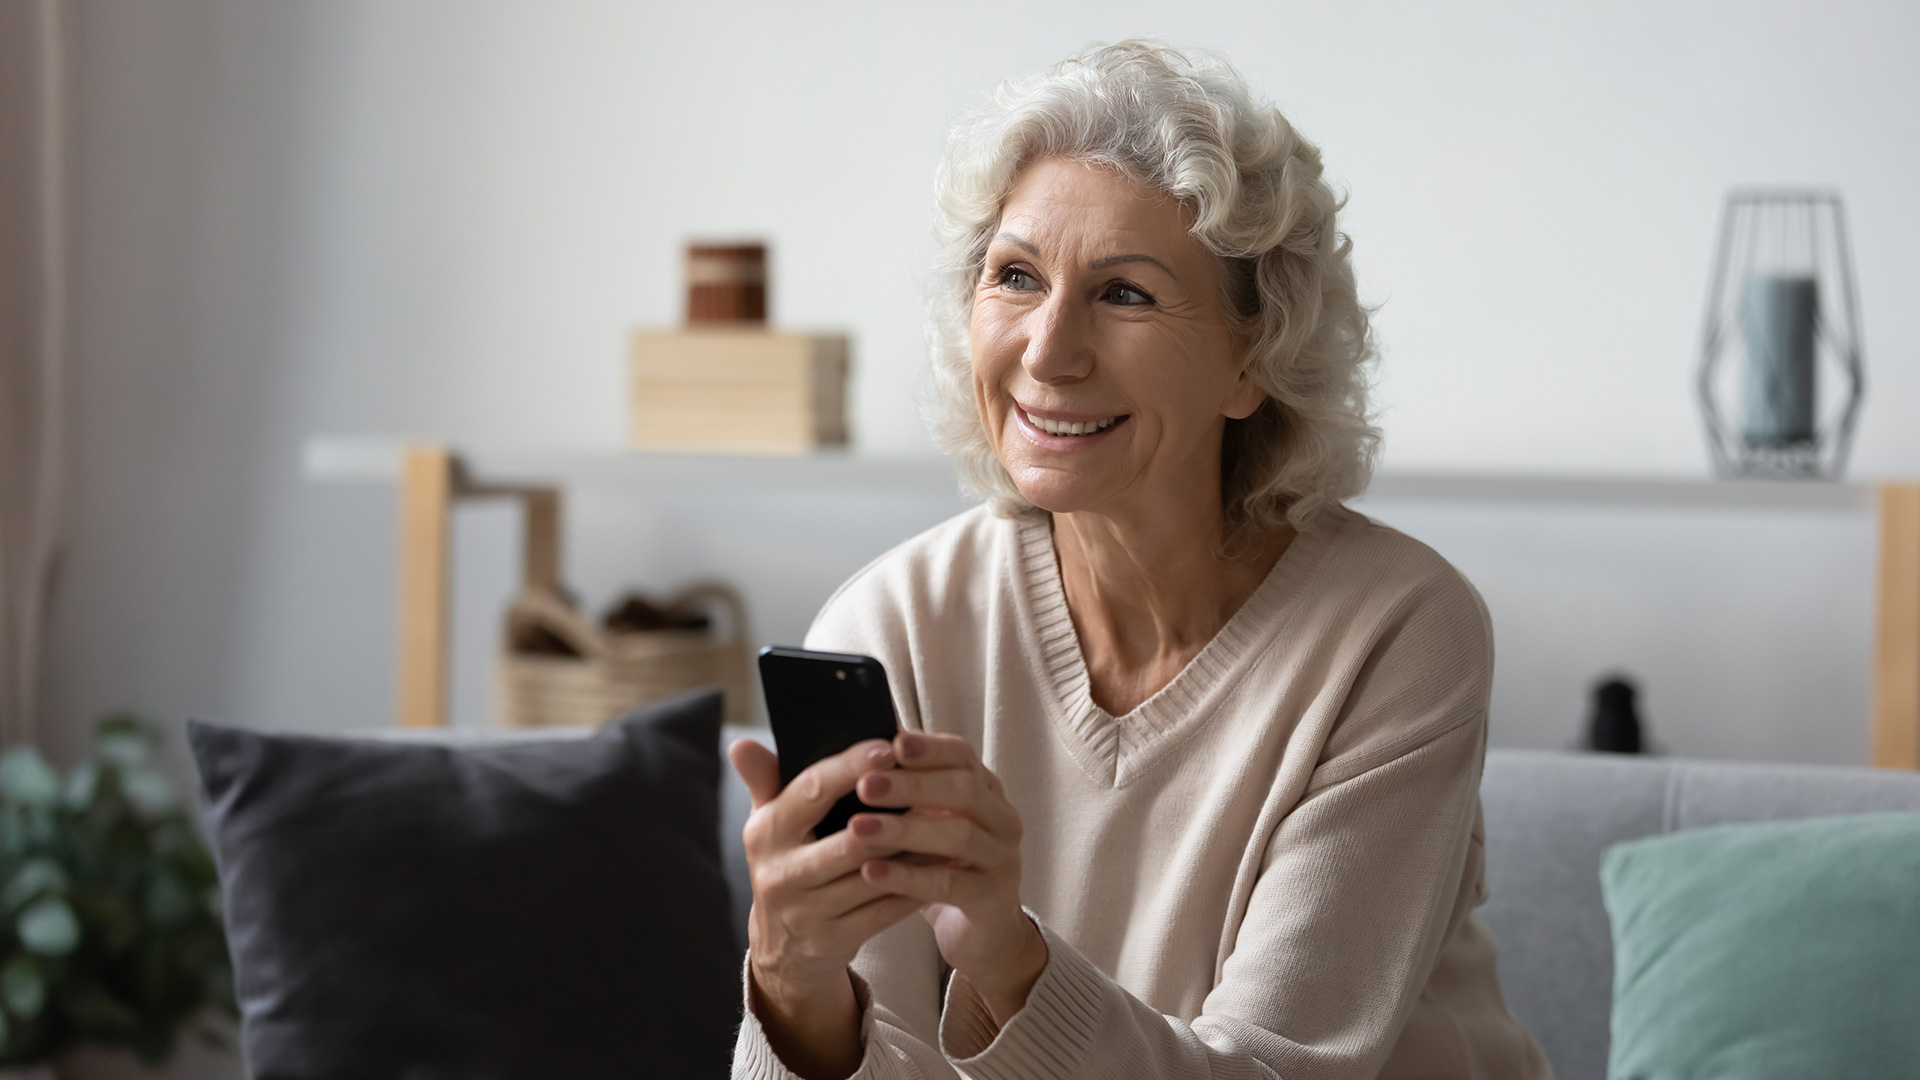 Older woman with white, medium-length hair holding her phone while smiling. She is sitting in her living room.